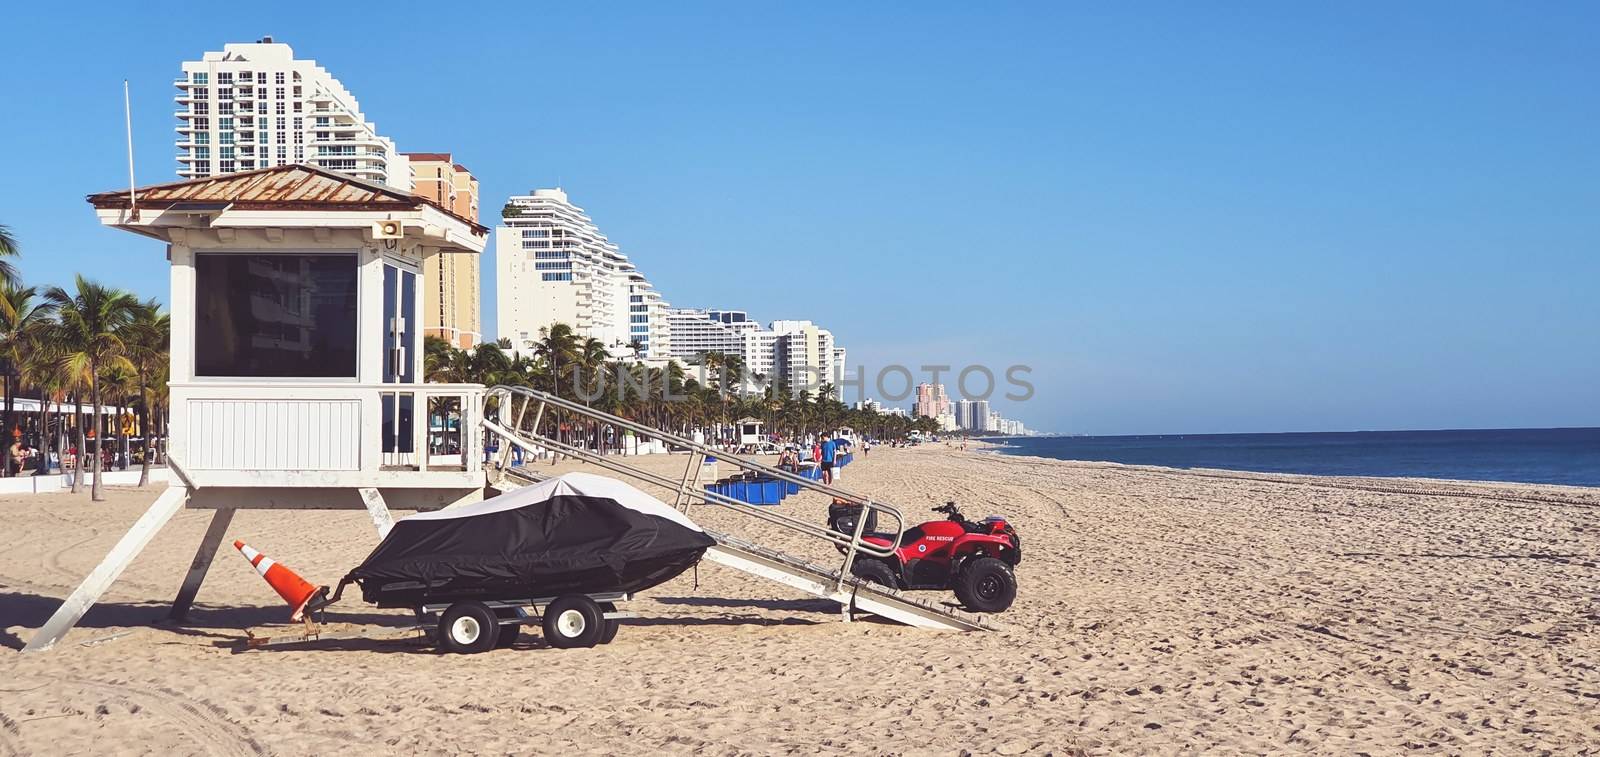 Life Guard Hut on Beach with Fort Lauderdale beach in the Background by TheDutchcowboy